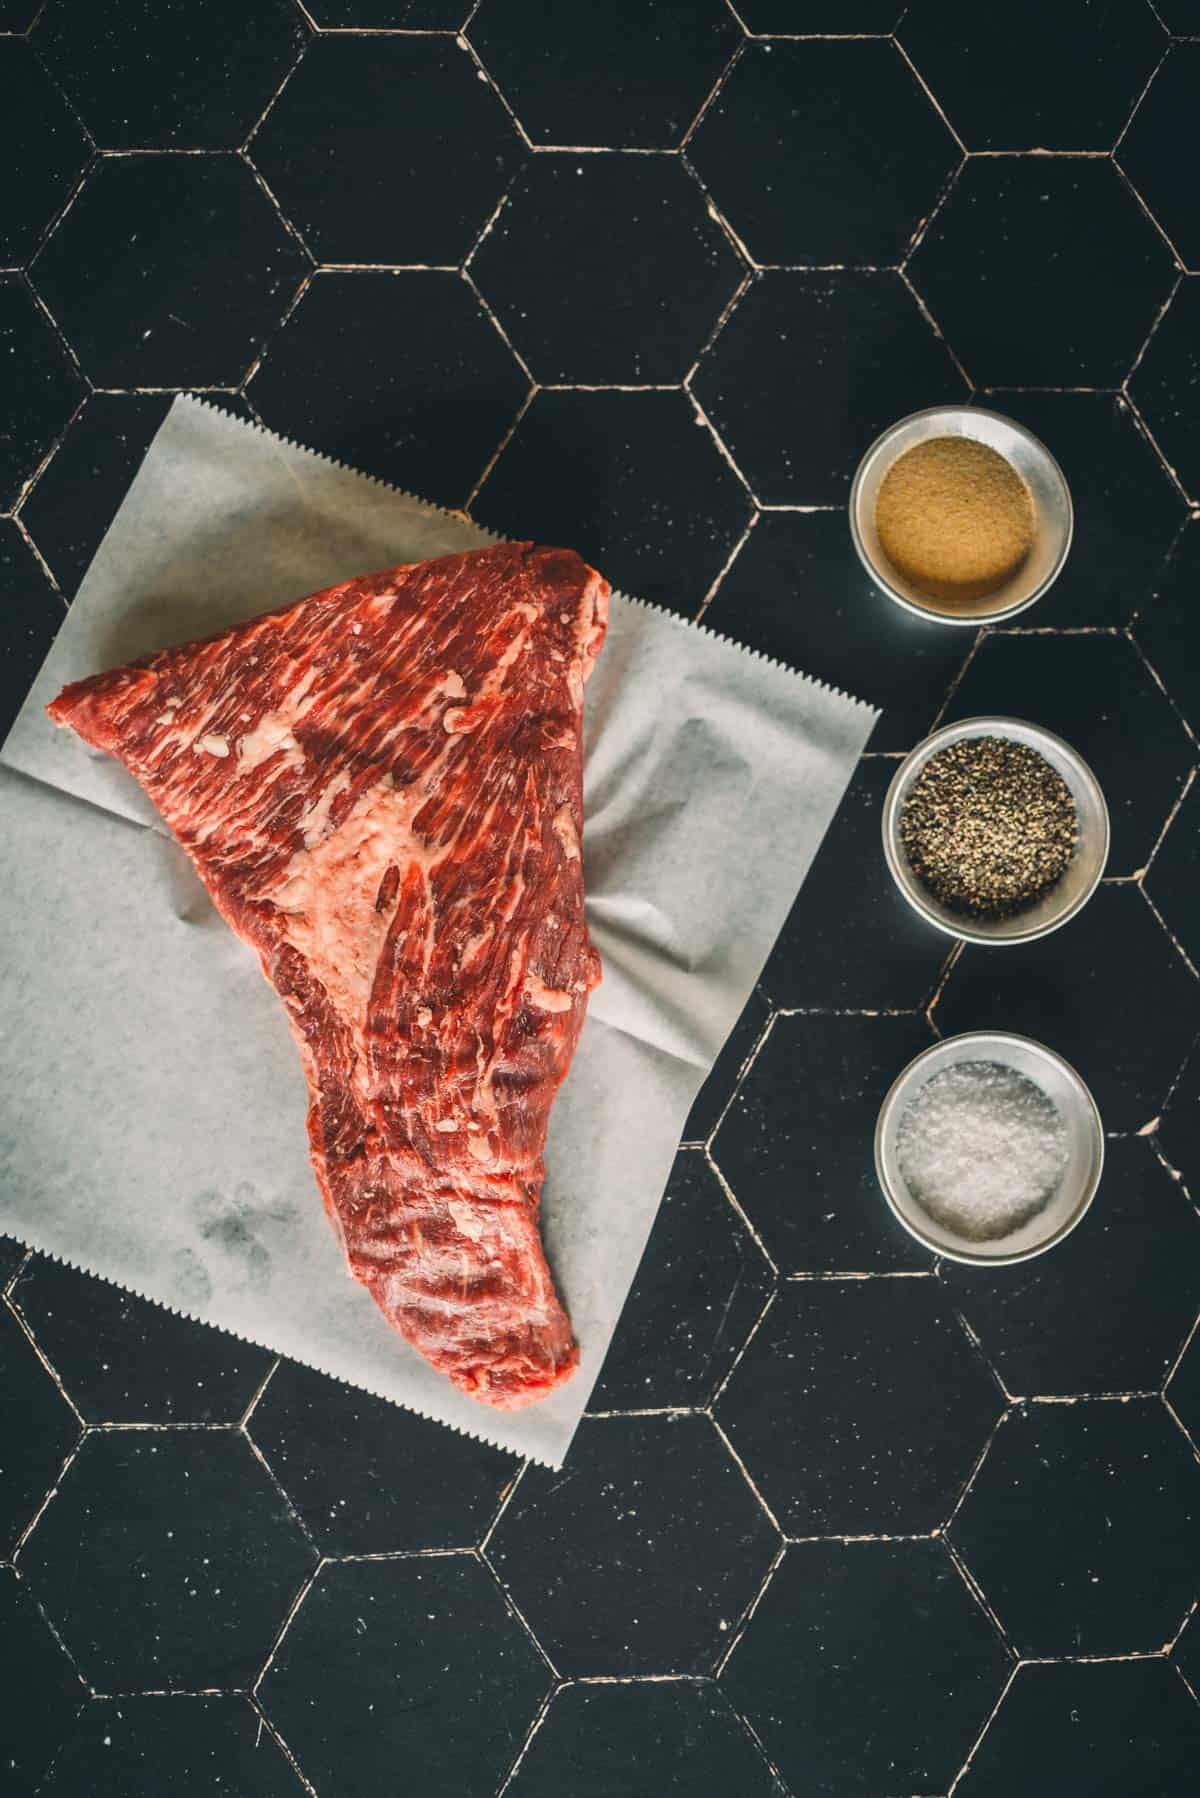 A raw tri-tip on parchment paper is positioned on a black tile surface, with small bowls containing spices placed beside it.